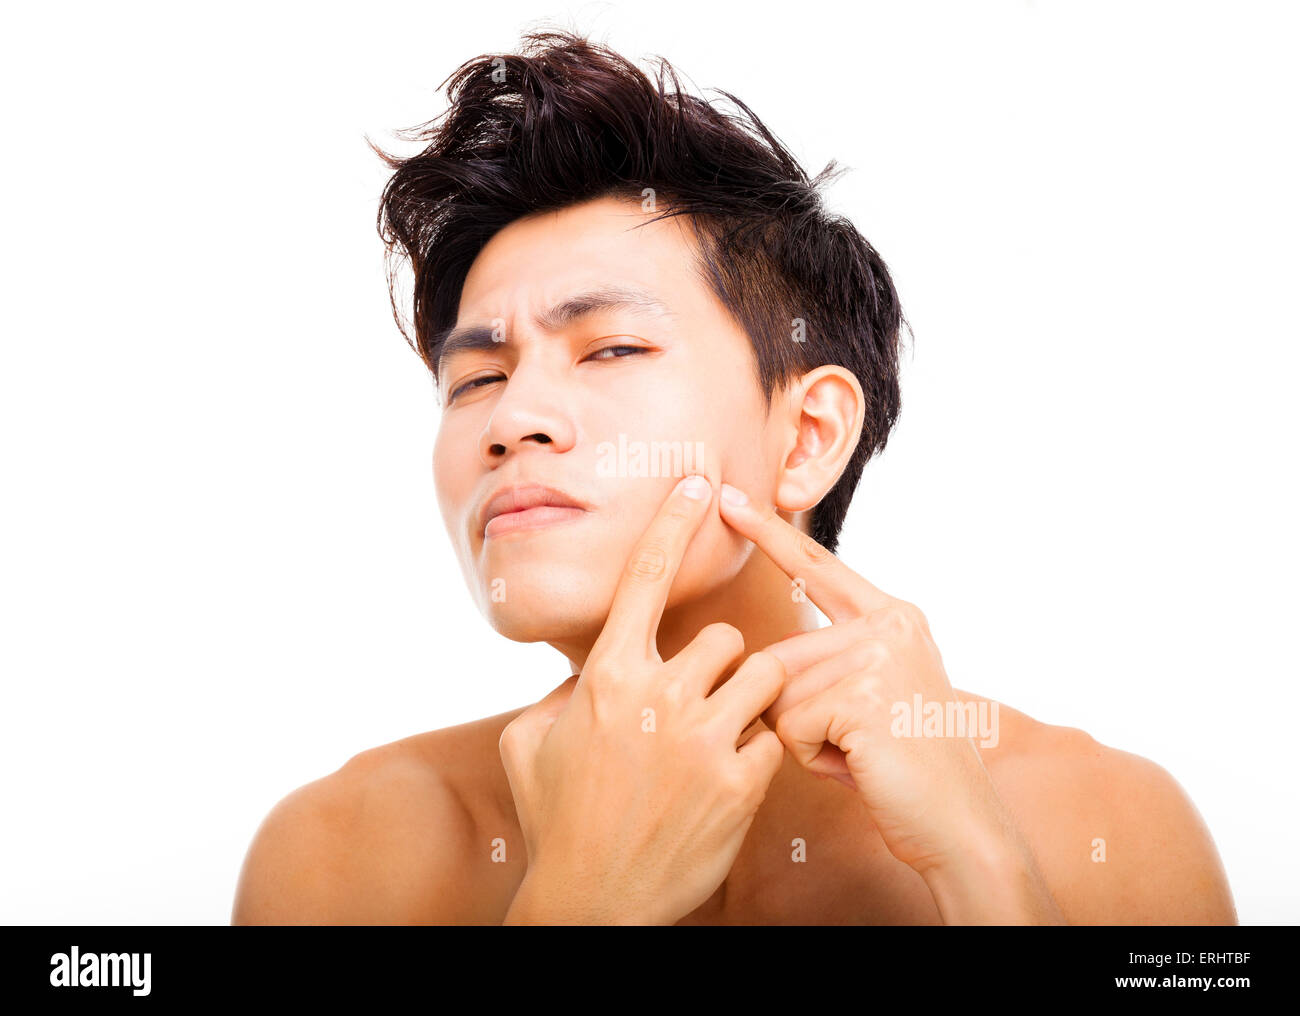 handsome young man Squeezing pimple Stock Photo